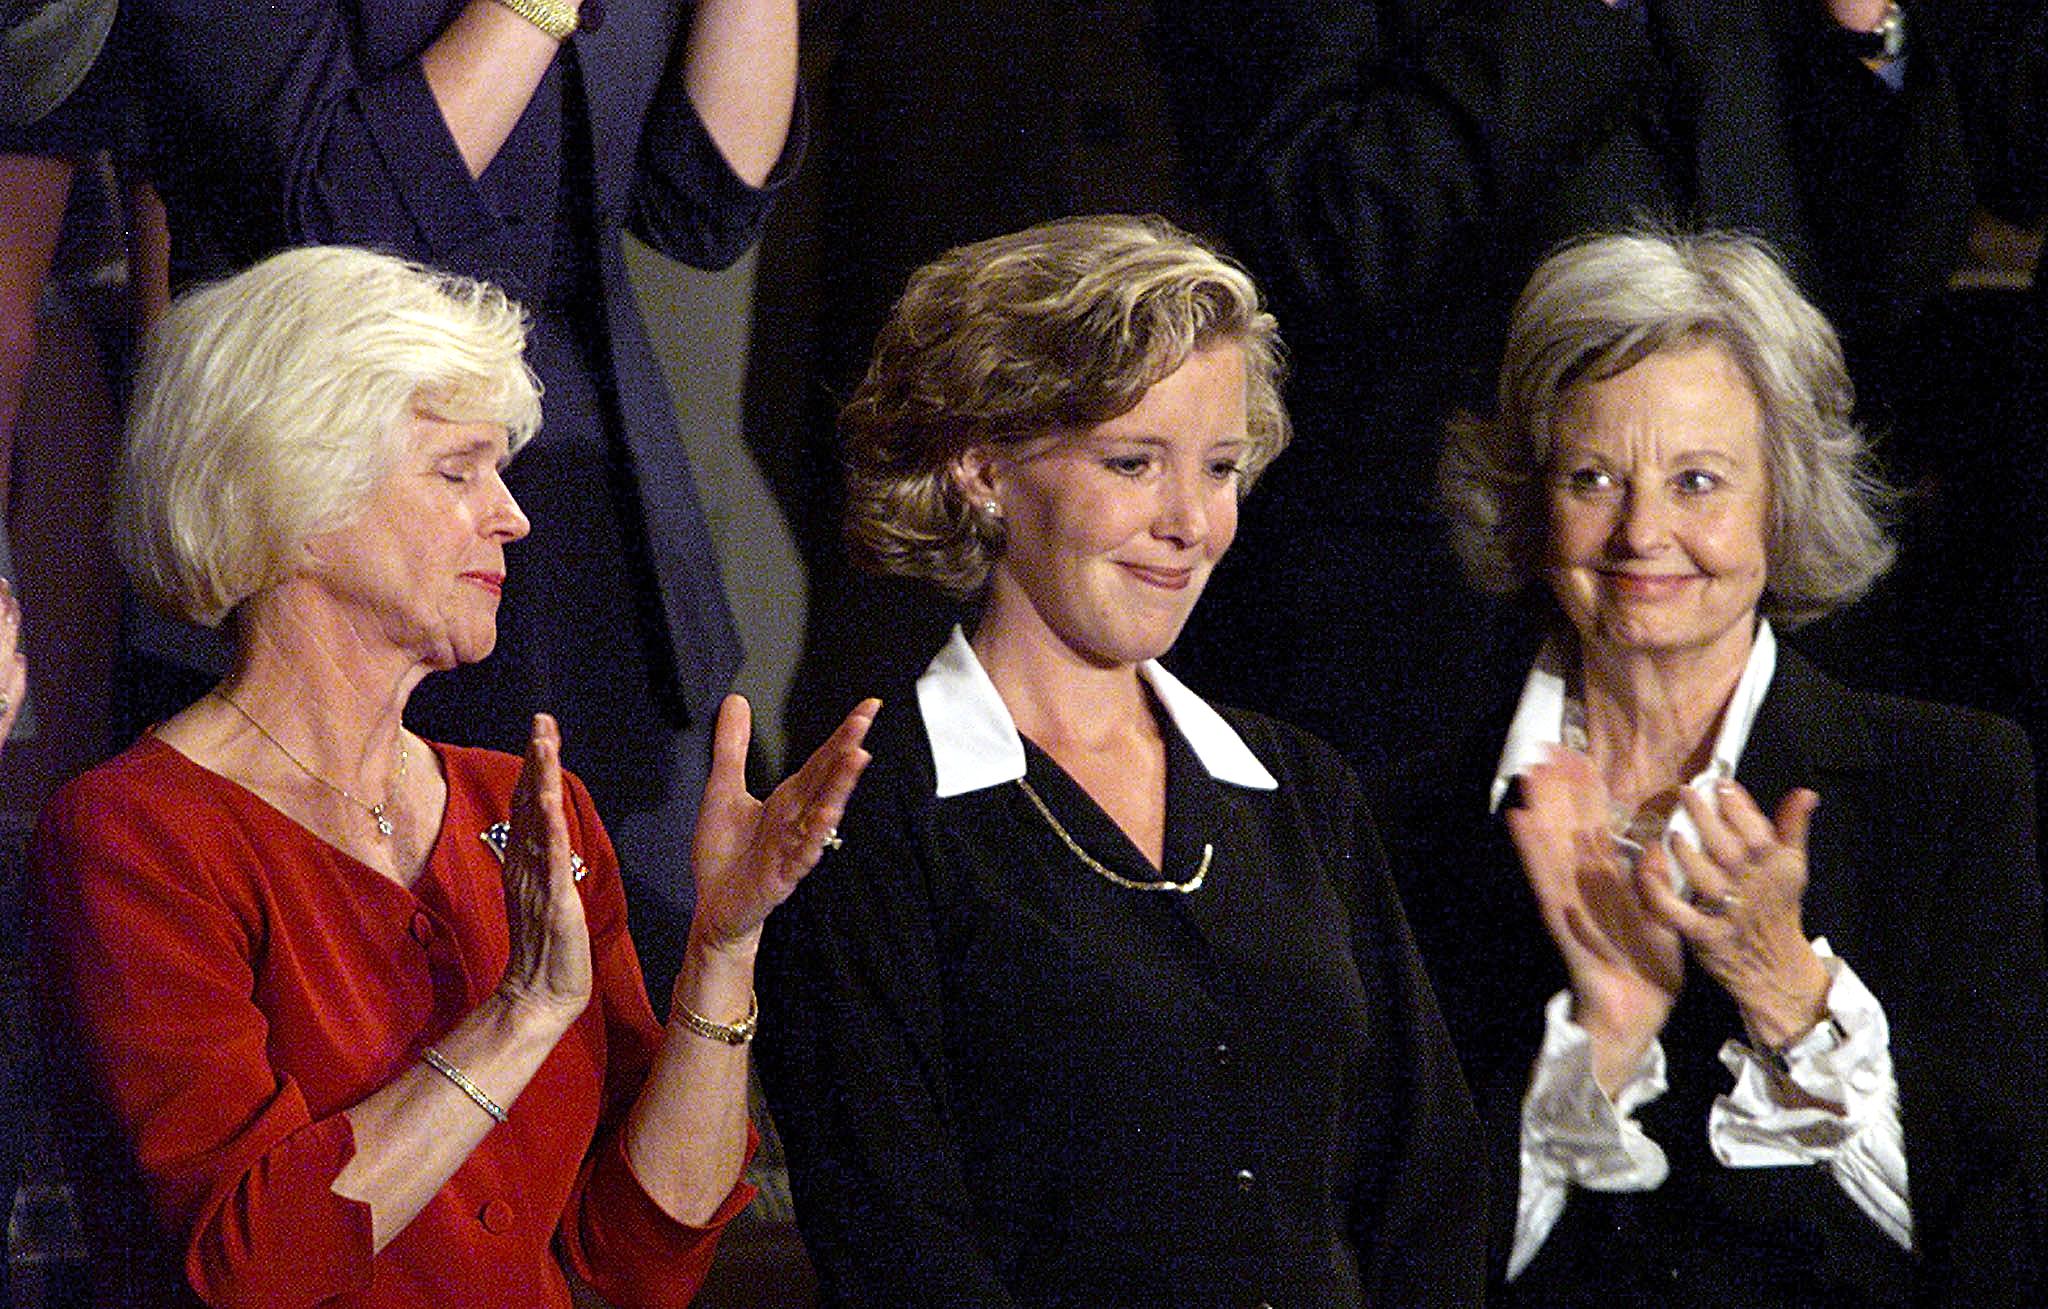 Lisa Beamer being acknowledged by the US Congress on September 20, 2001, in Washington | Source: Getty Images